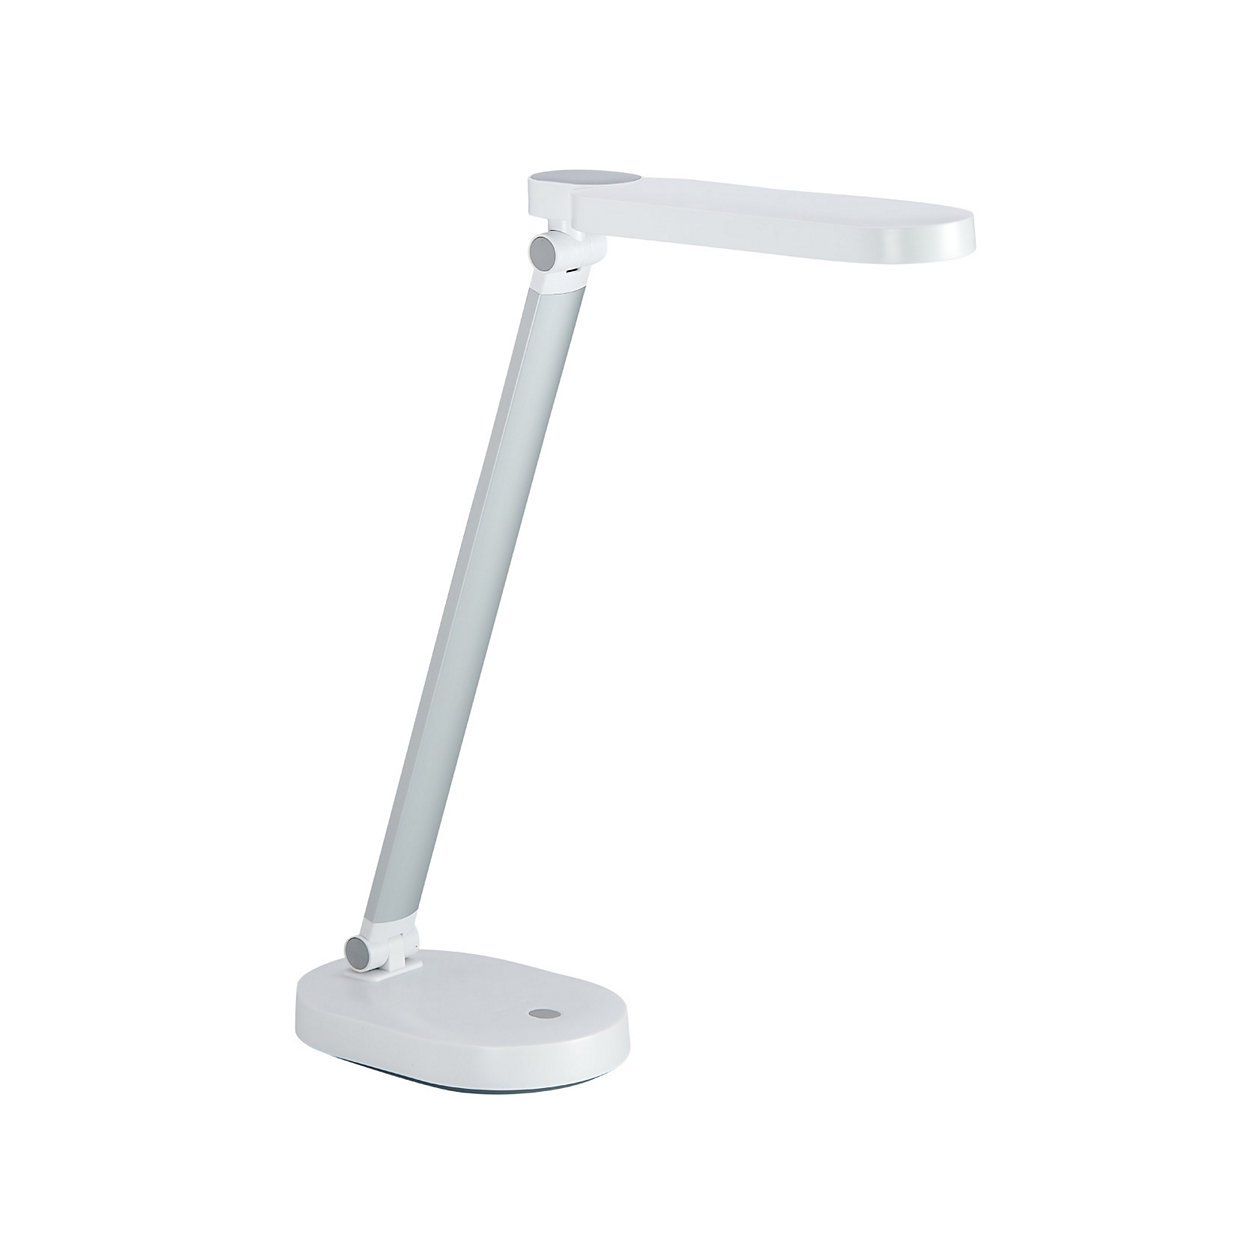 Reliable desk lighting for more convenience